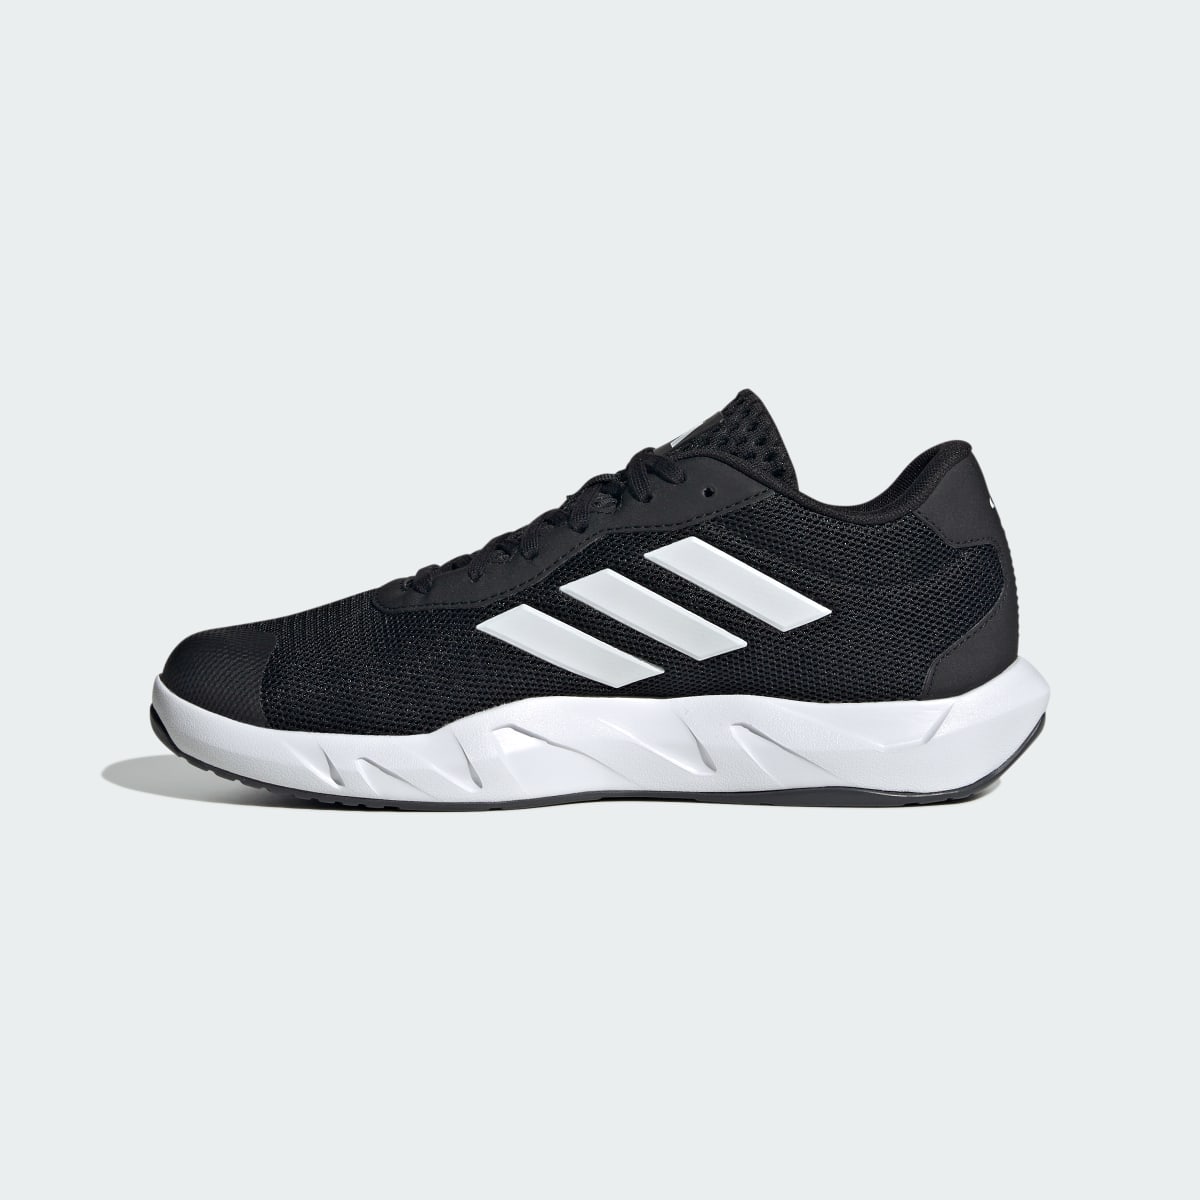 Adidas Amplimove Trainer Shoes. 7